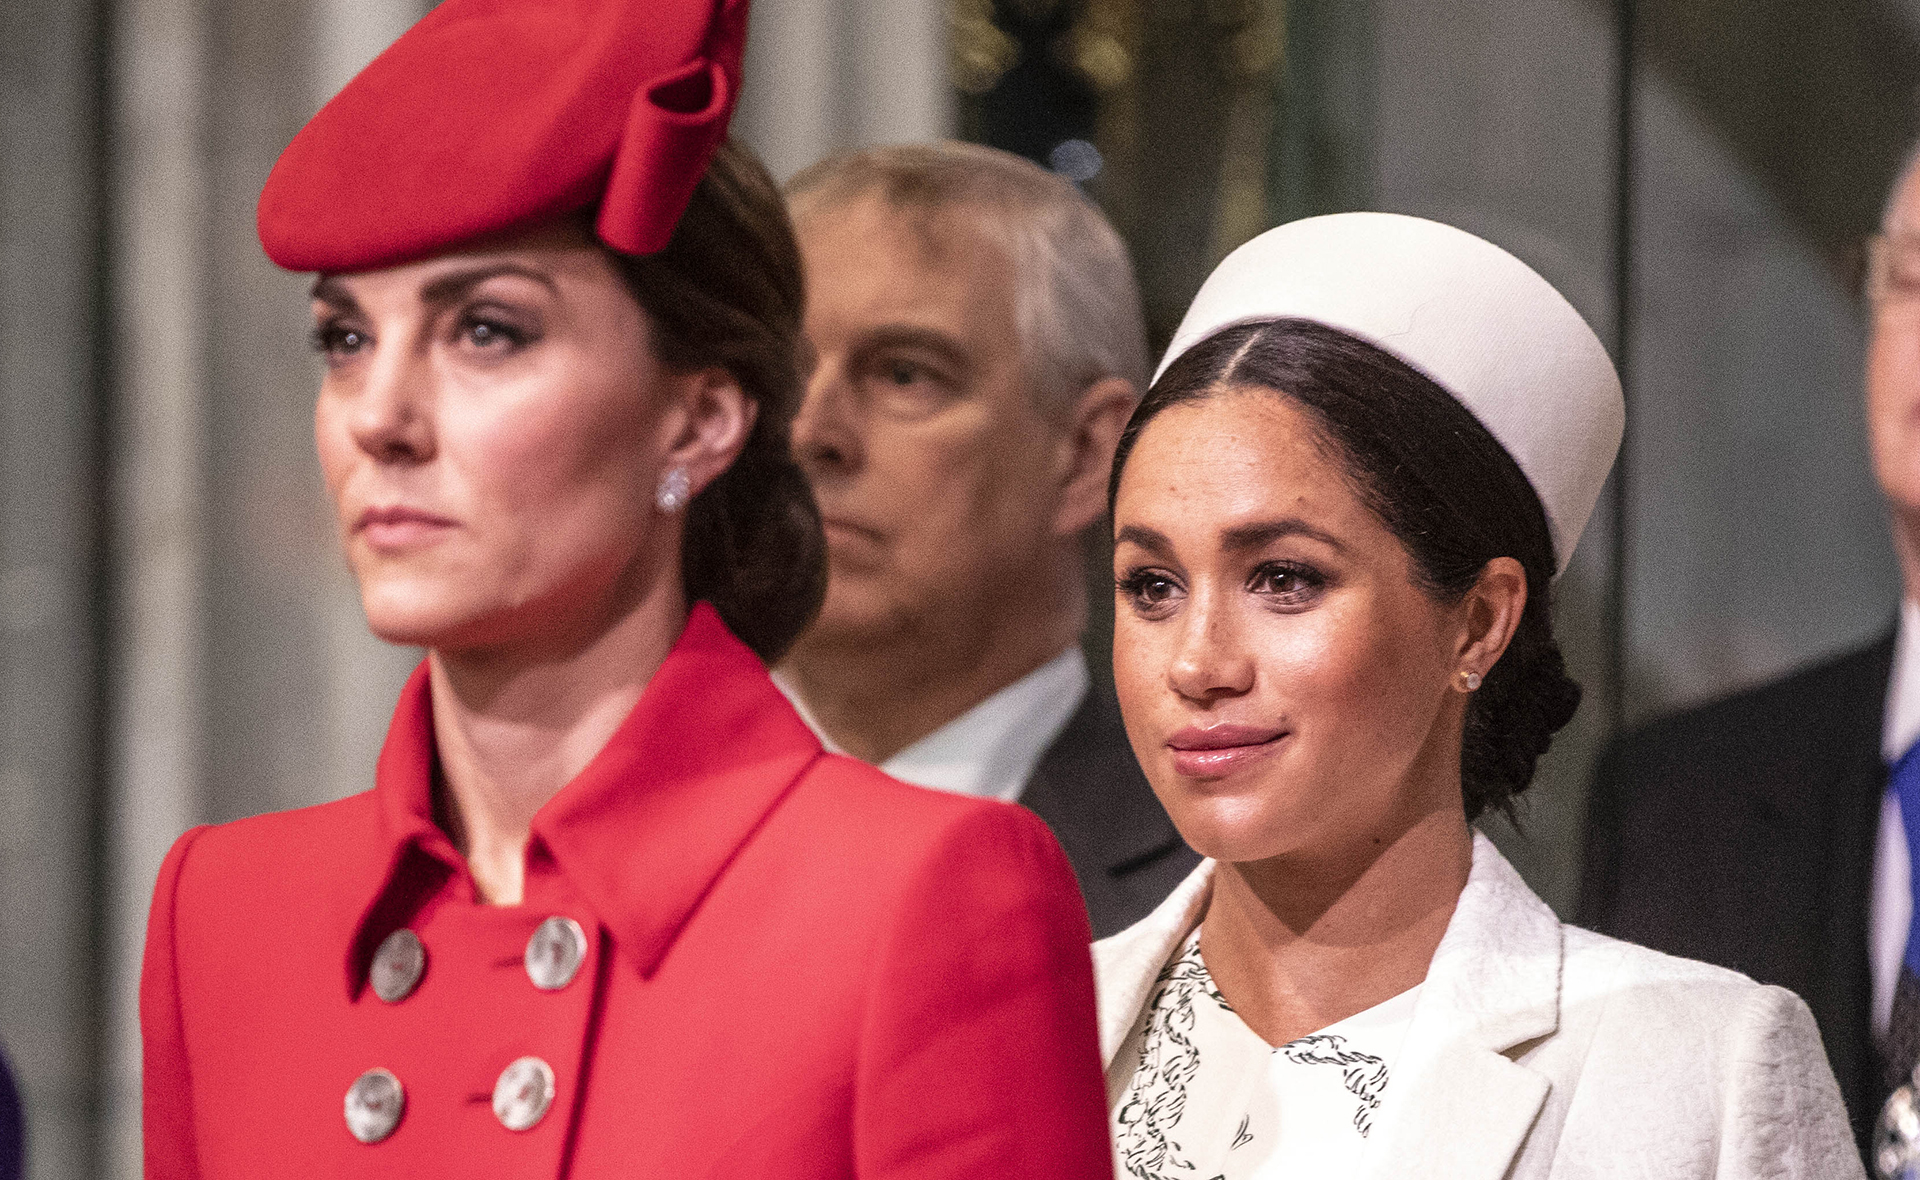 Why Meghan Markle became “obsessed” with correcting the record on that bridesmaids fitting fight with Kate Middleton